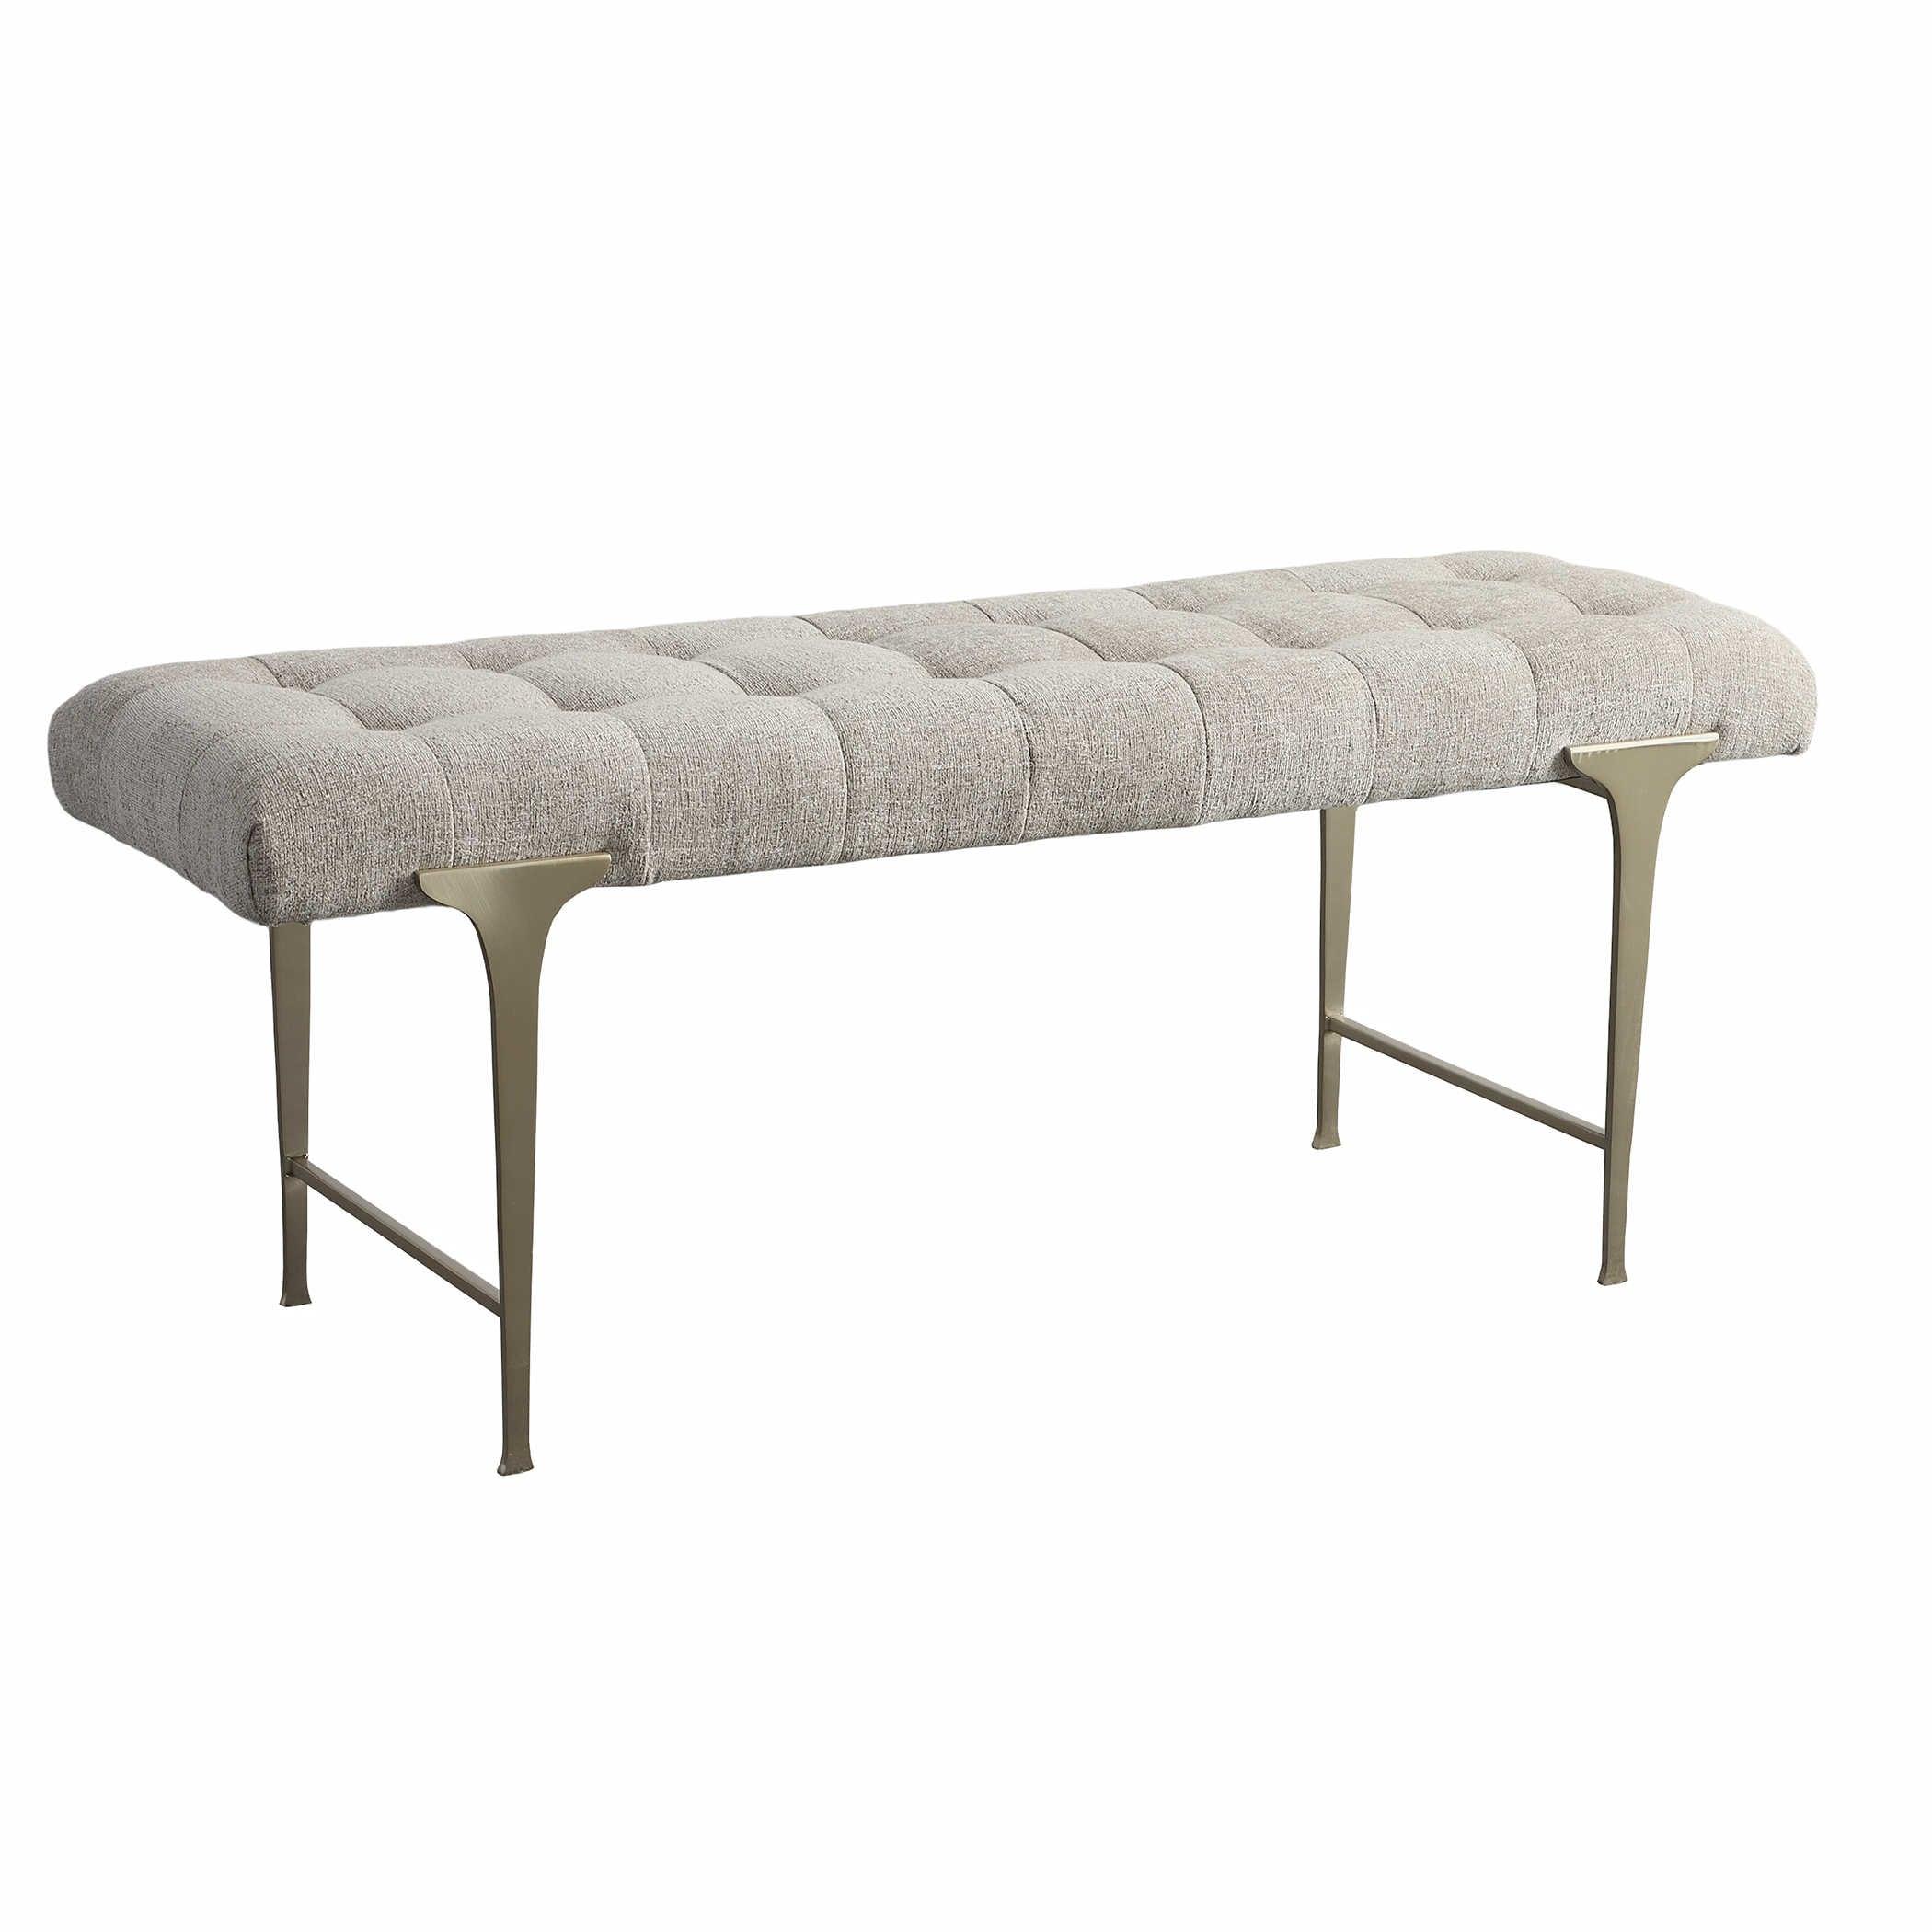 The Uttermost - Imperial Bench - 23765 | Montreal Lighting & Hardware